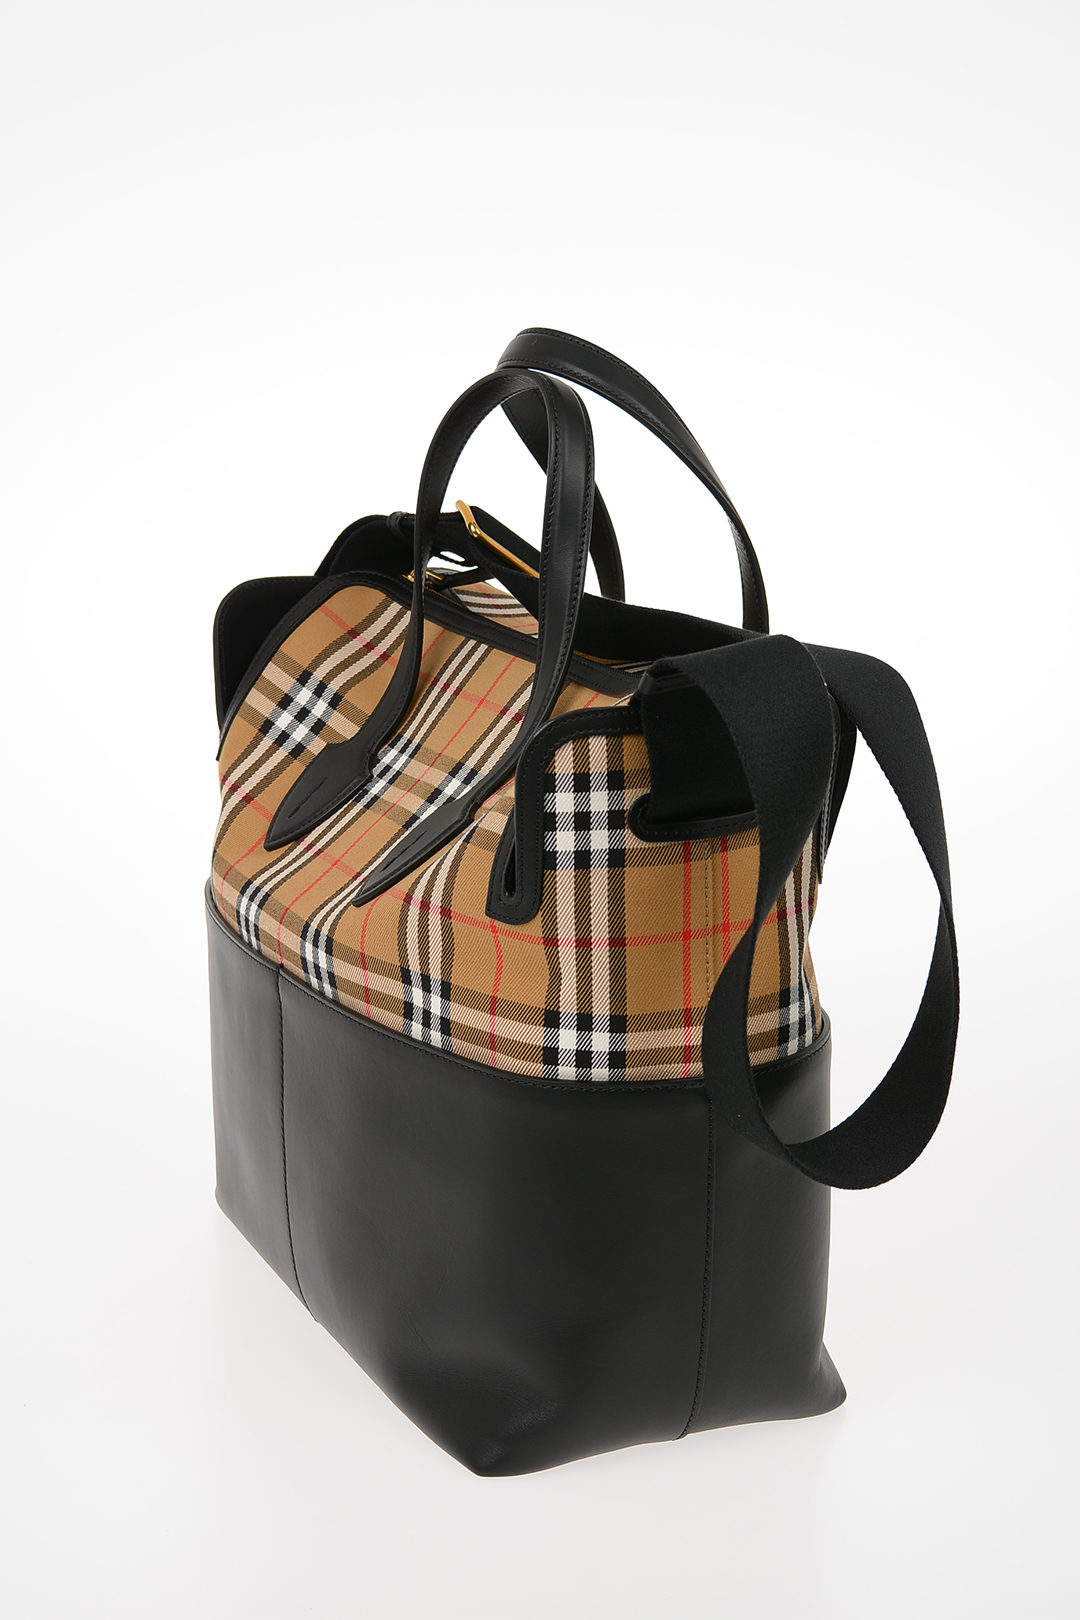 Burberry Kingswood Vintage Check & Leather Diaper Bag in Black